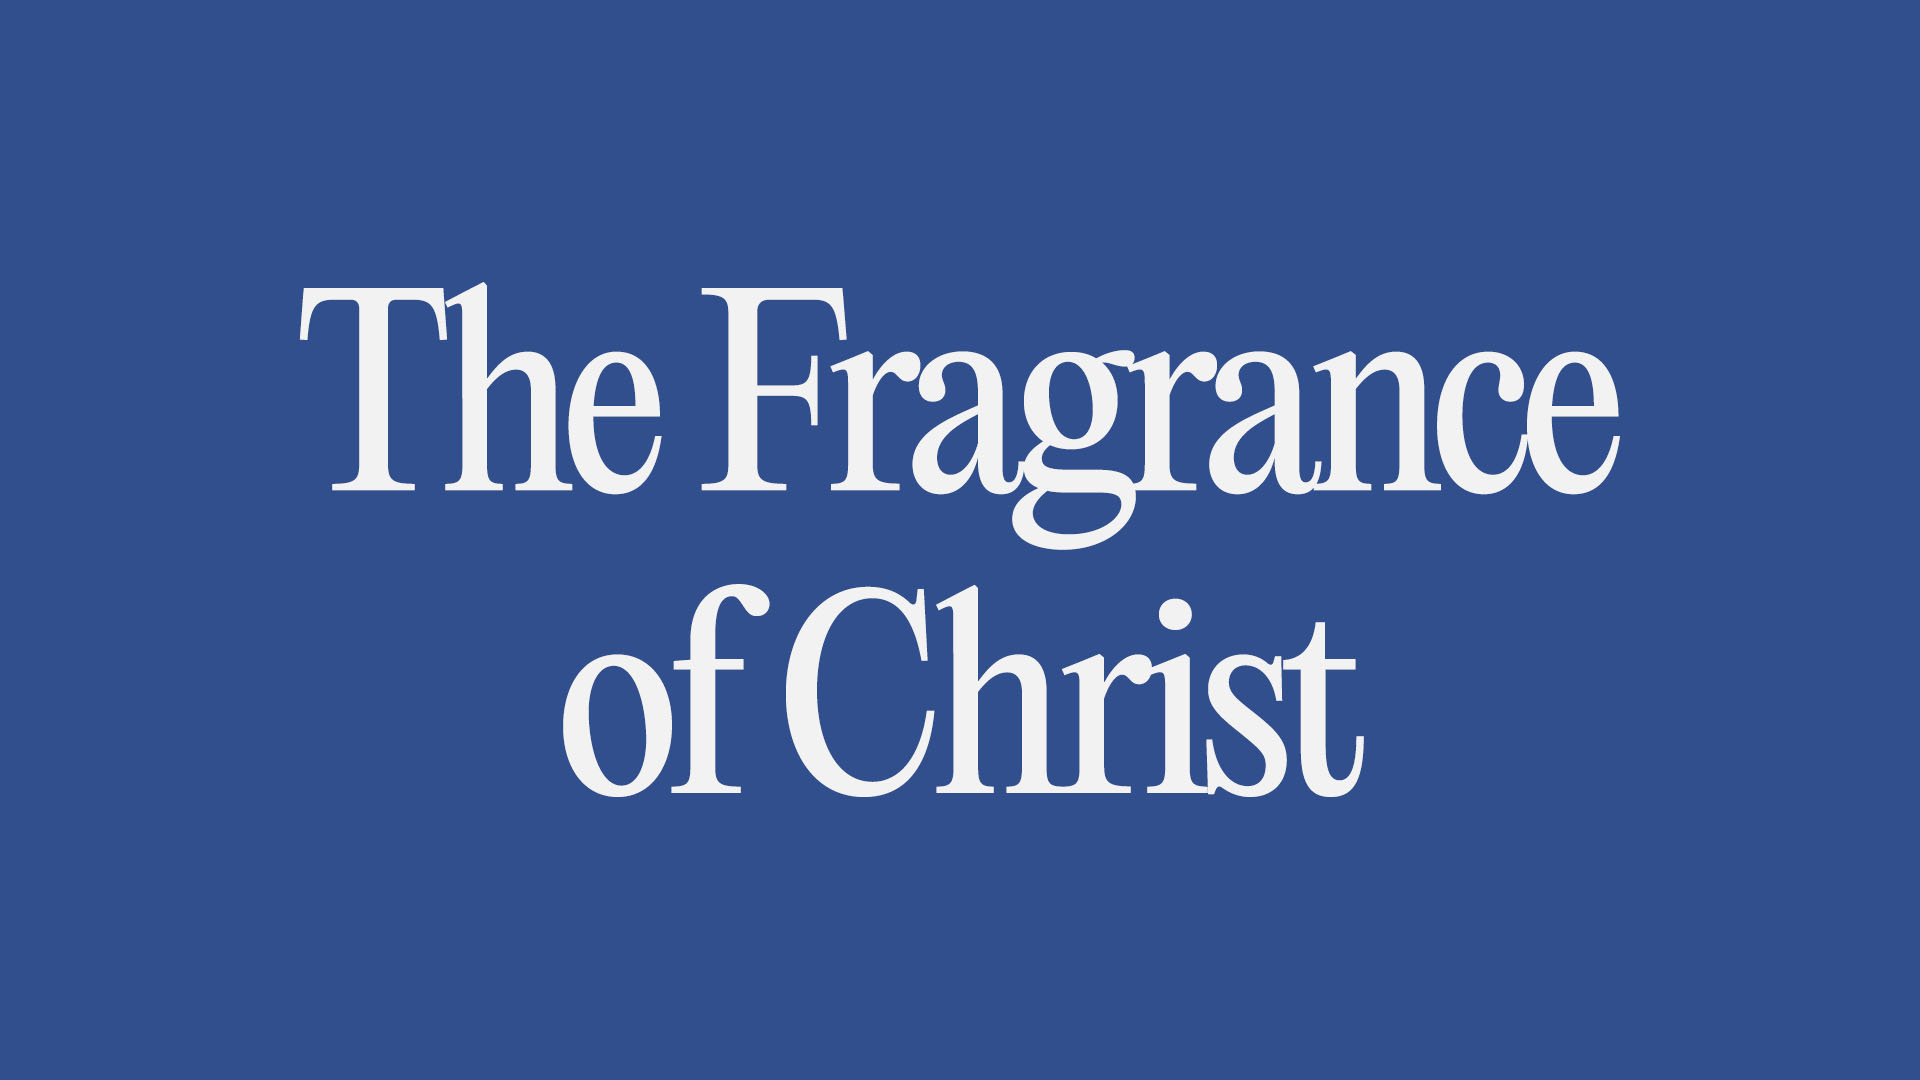 The Fragrance of Christ Image